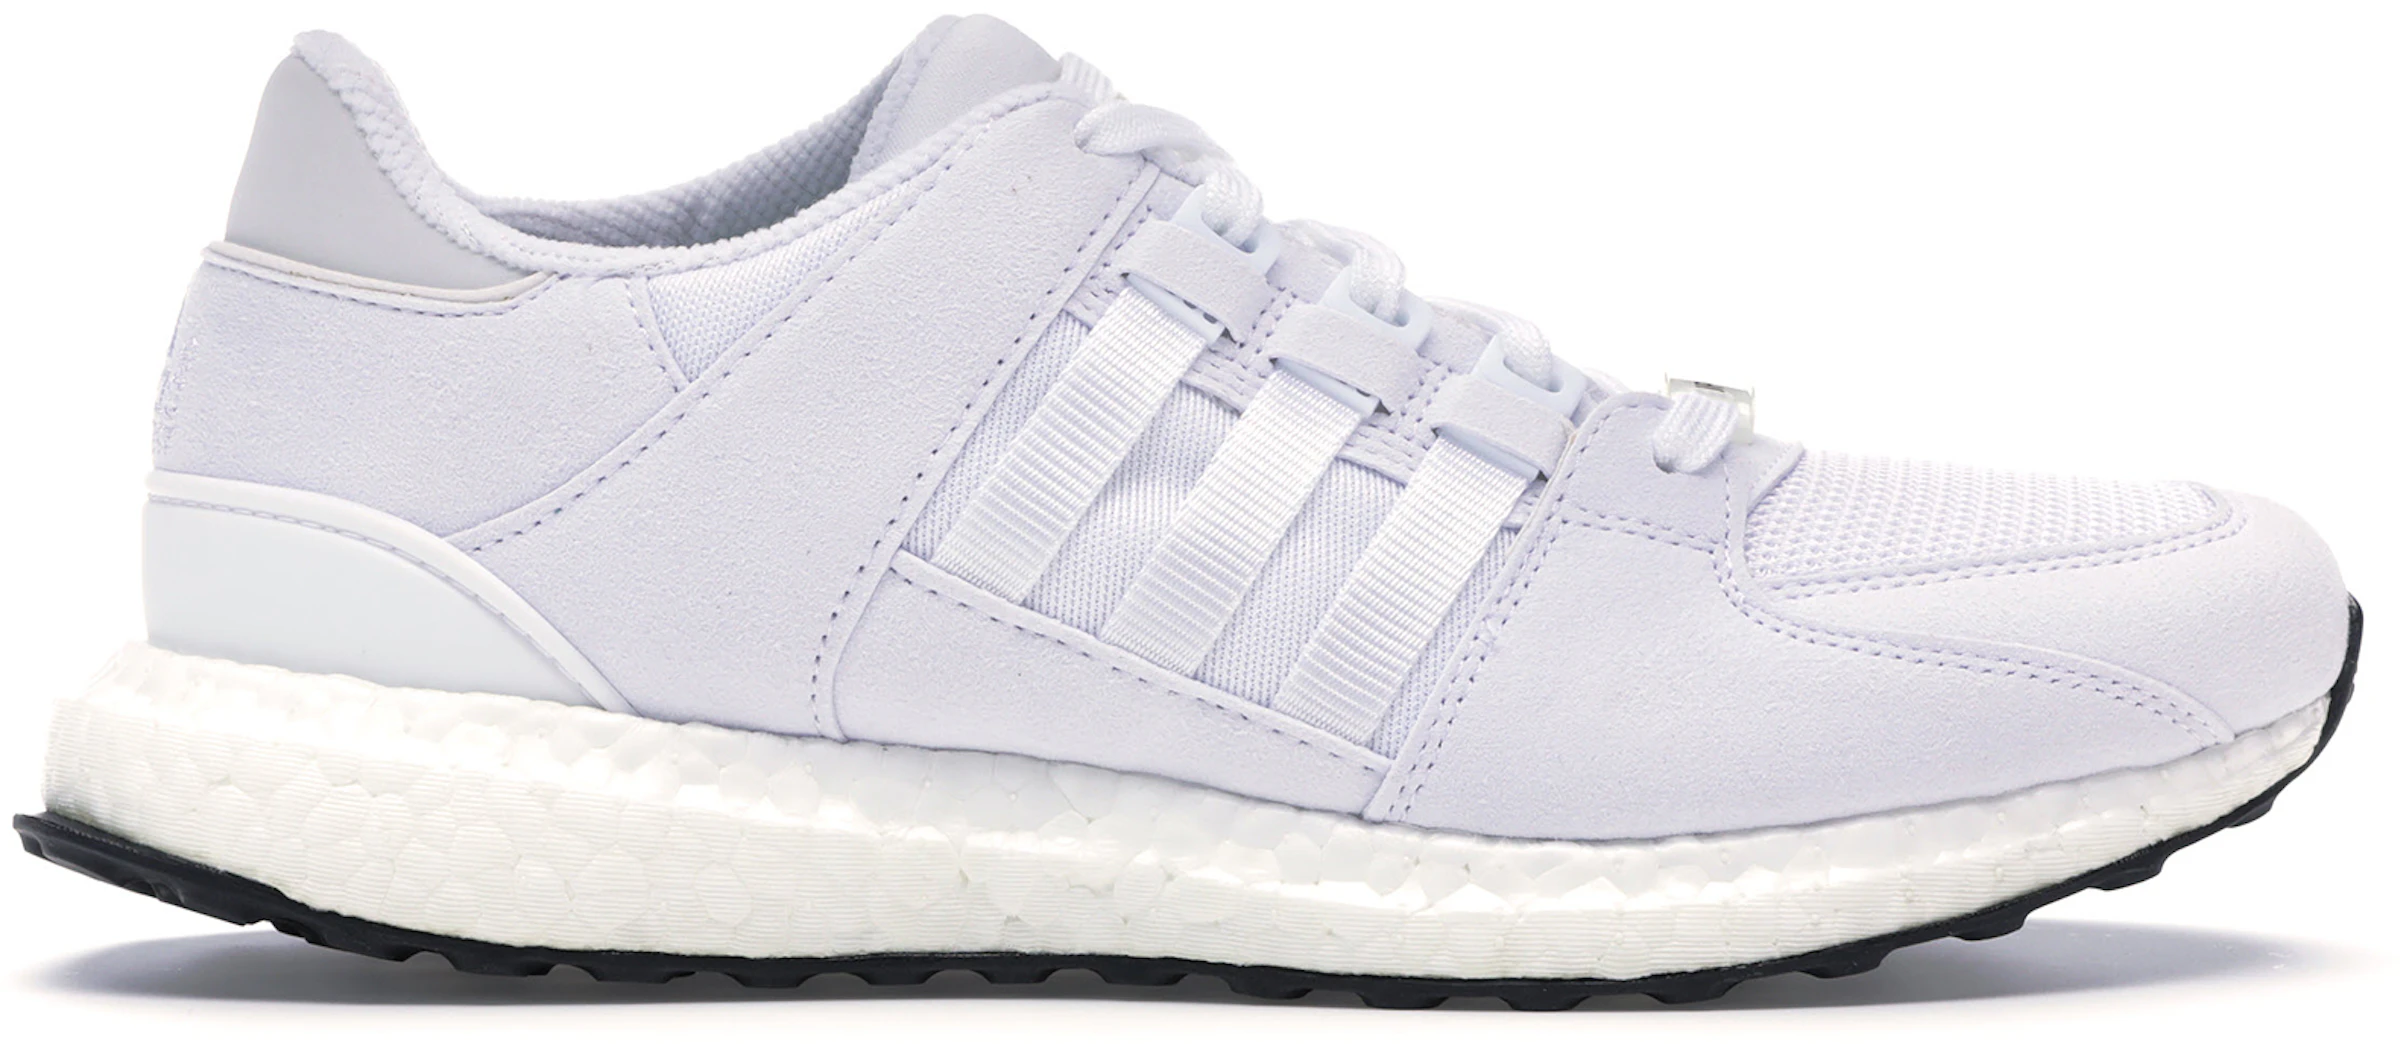 adidas EQT Support 93/16 White - S79921 US